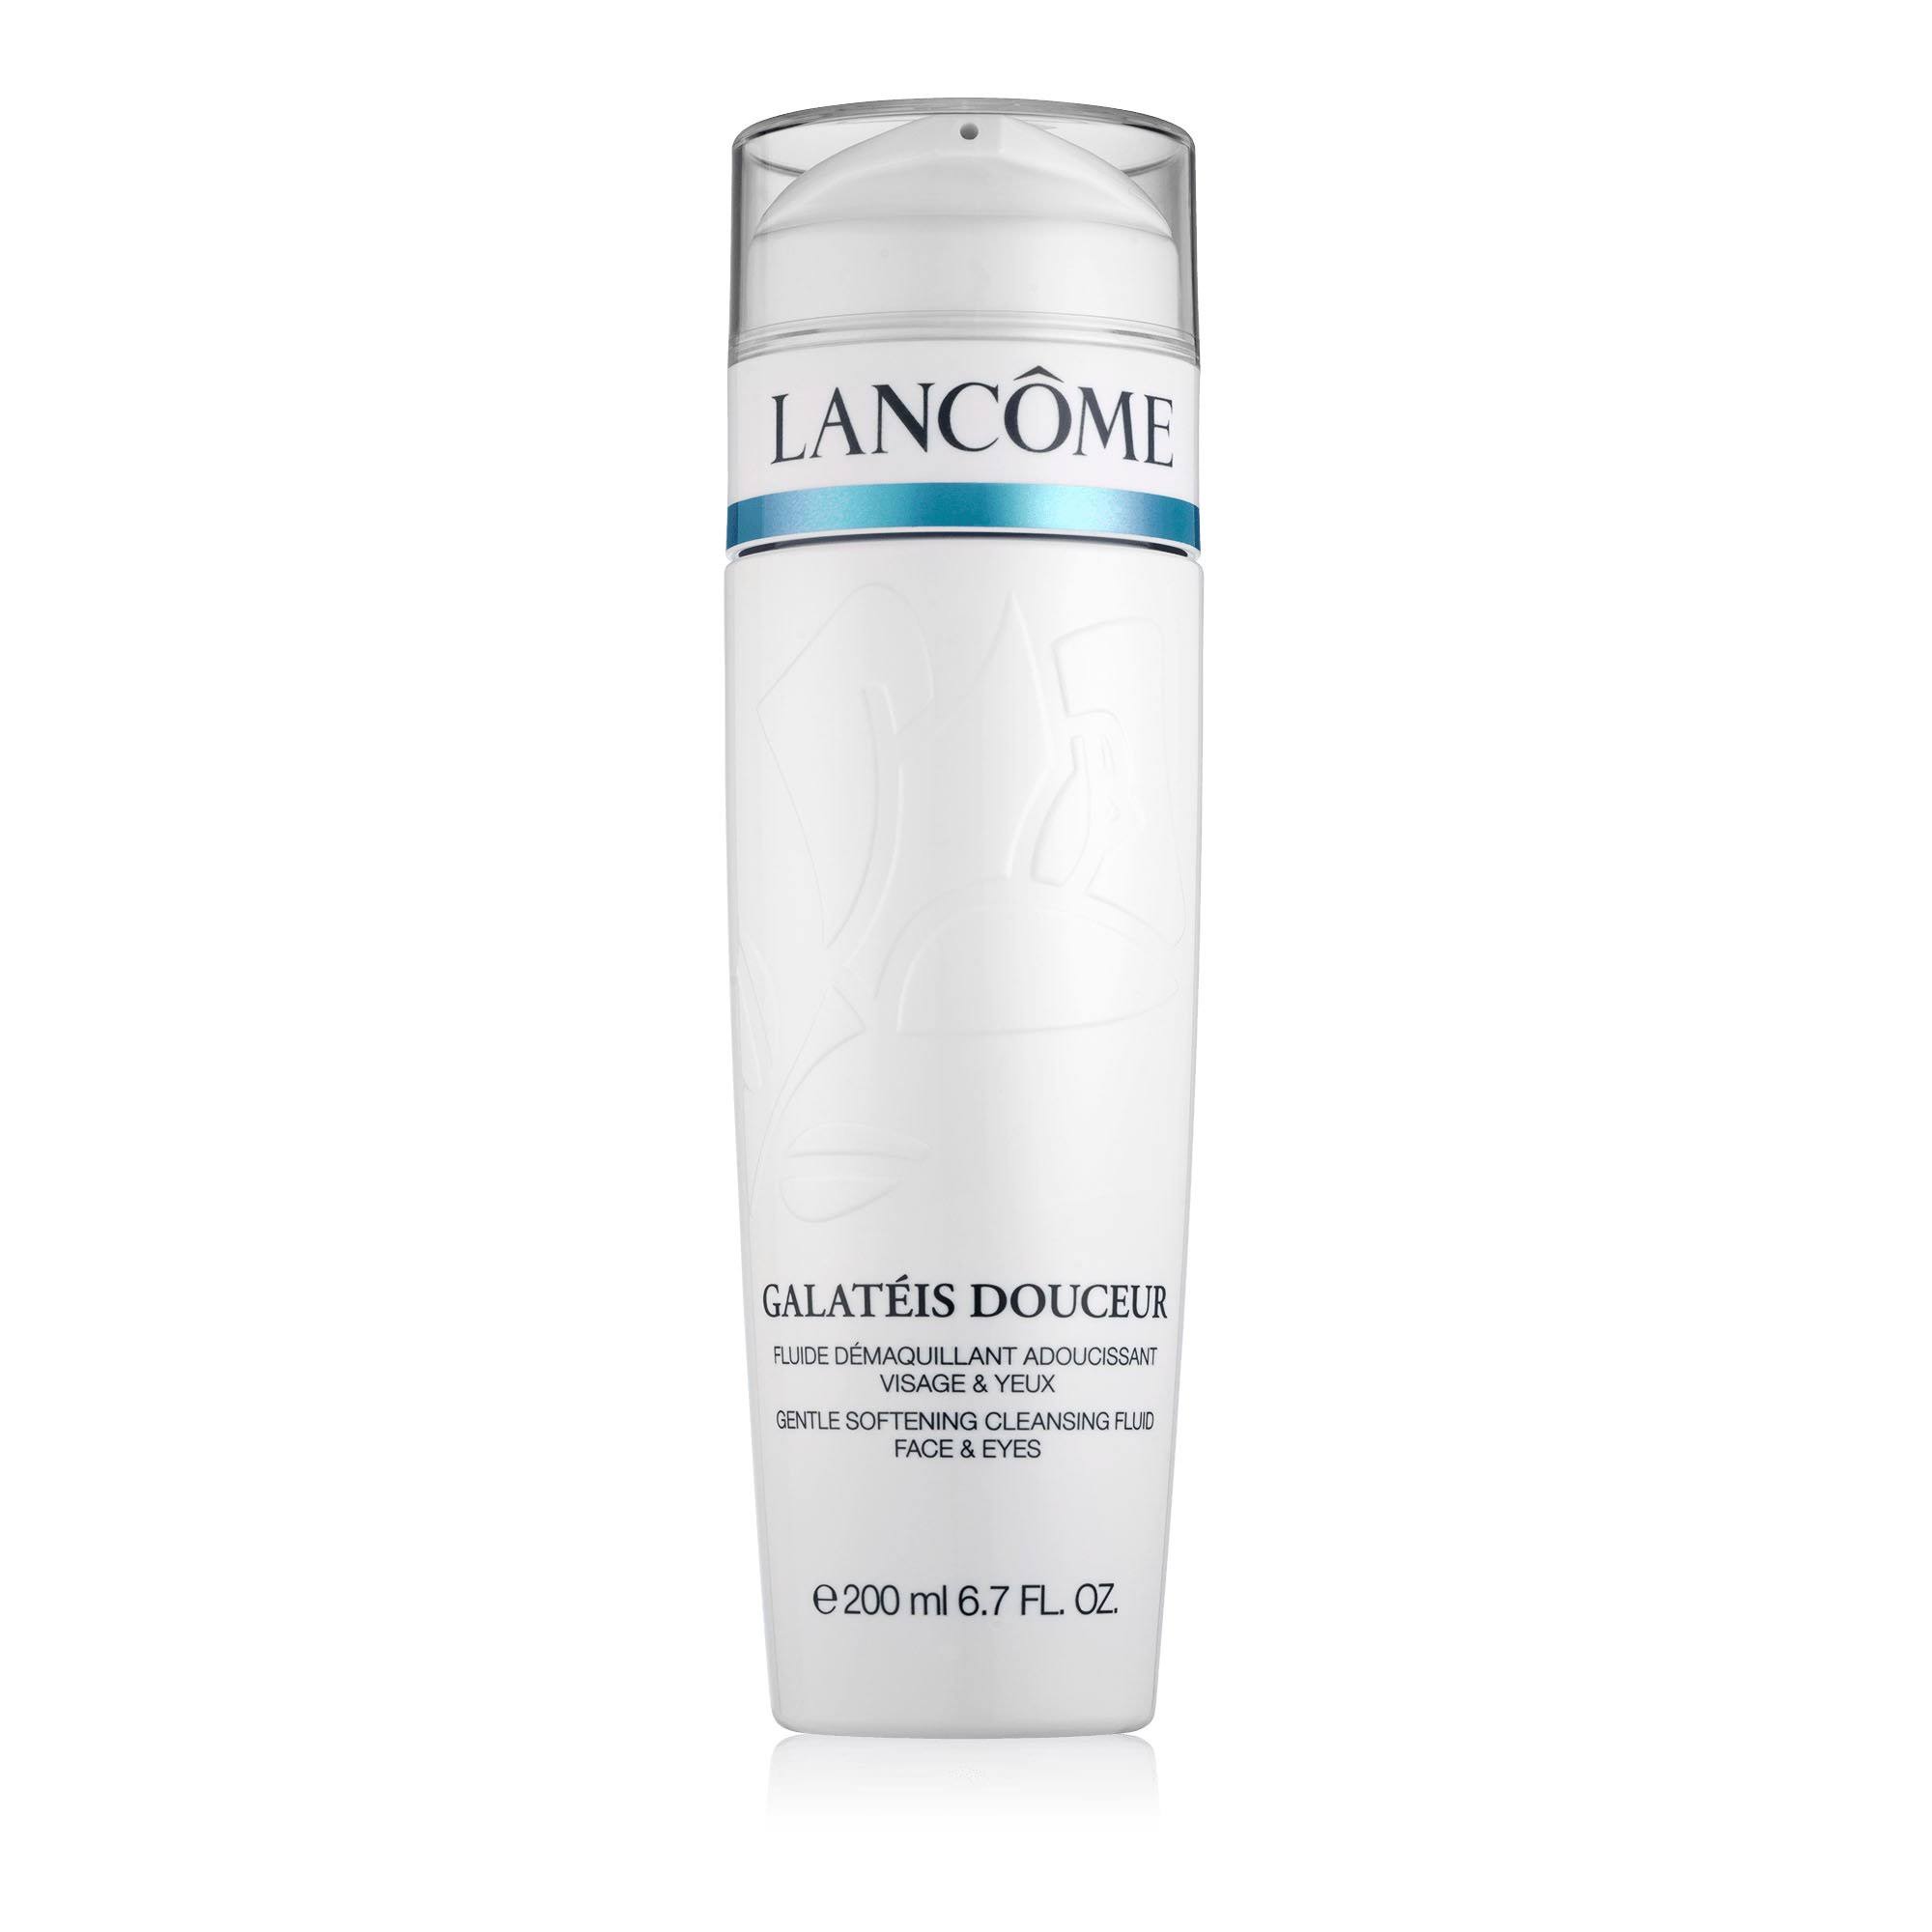 Lancome Galateis Douceur Cleanser Face & Eyes - 200ml